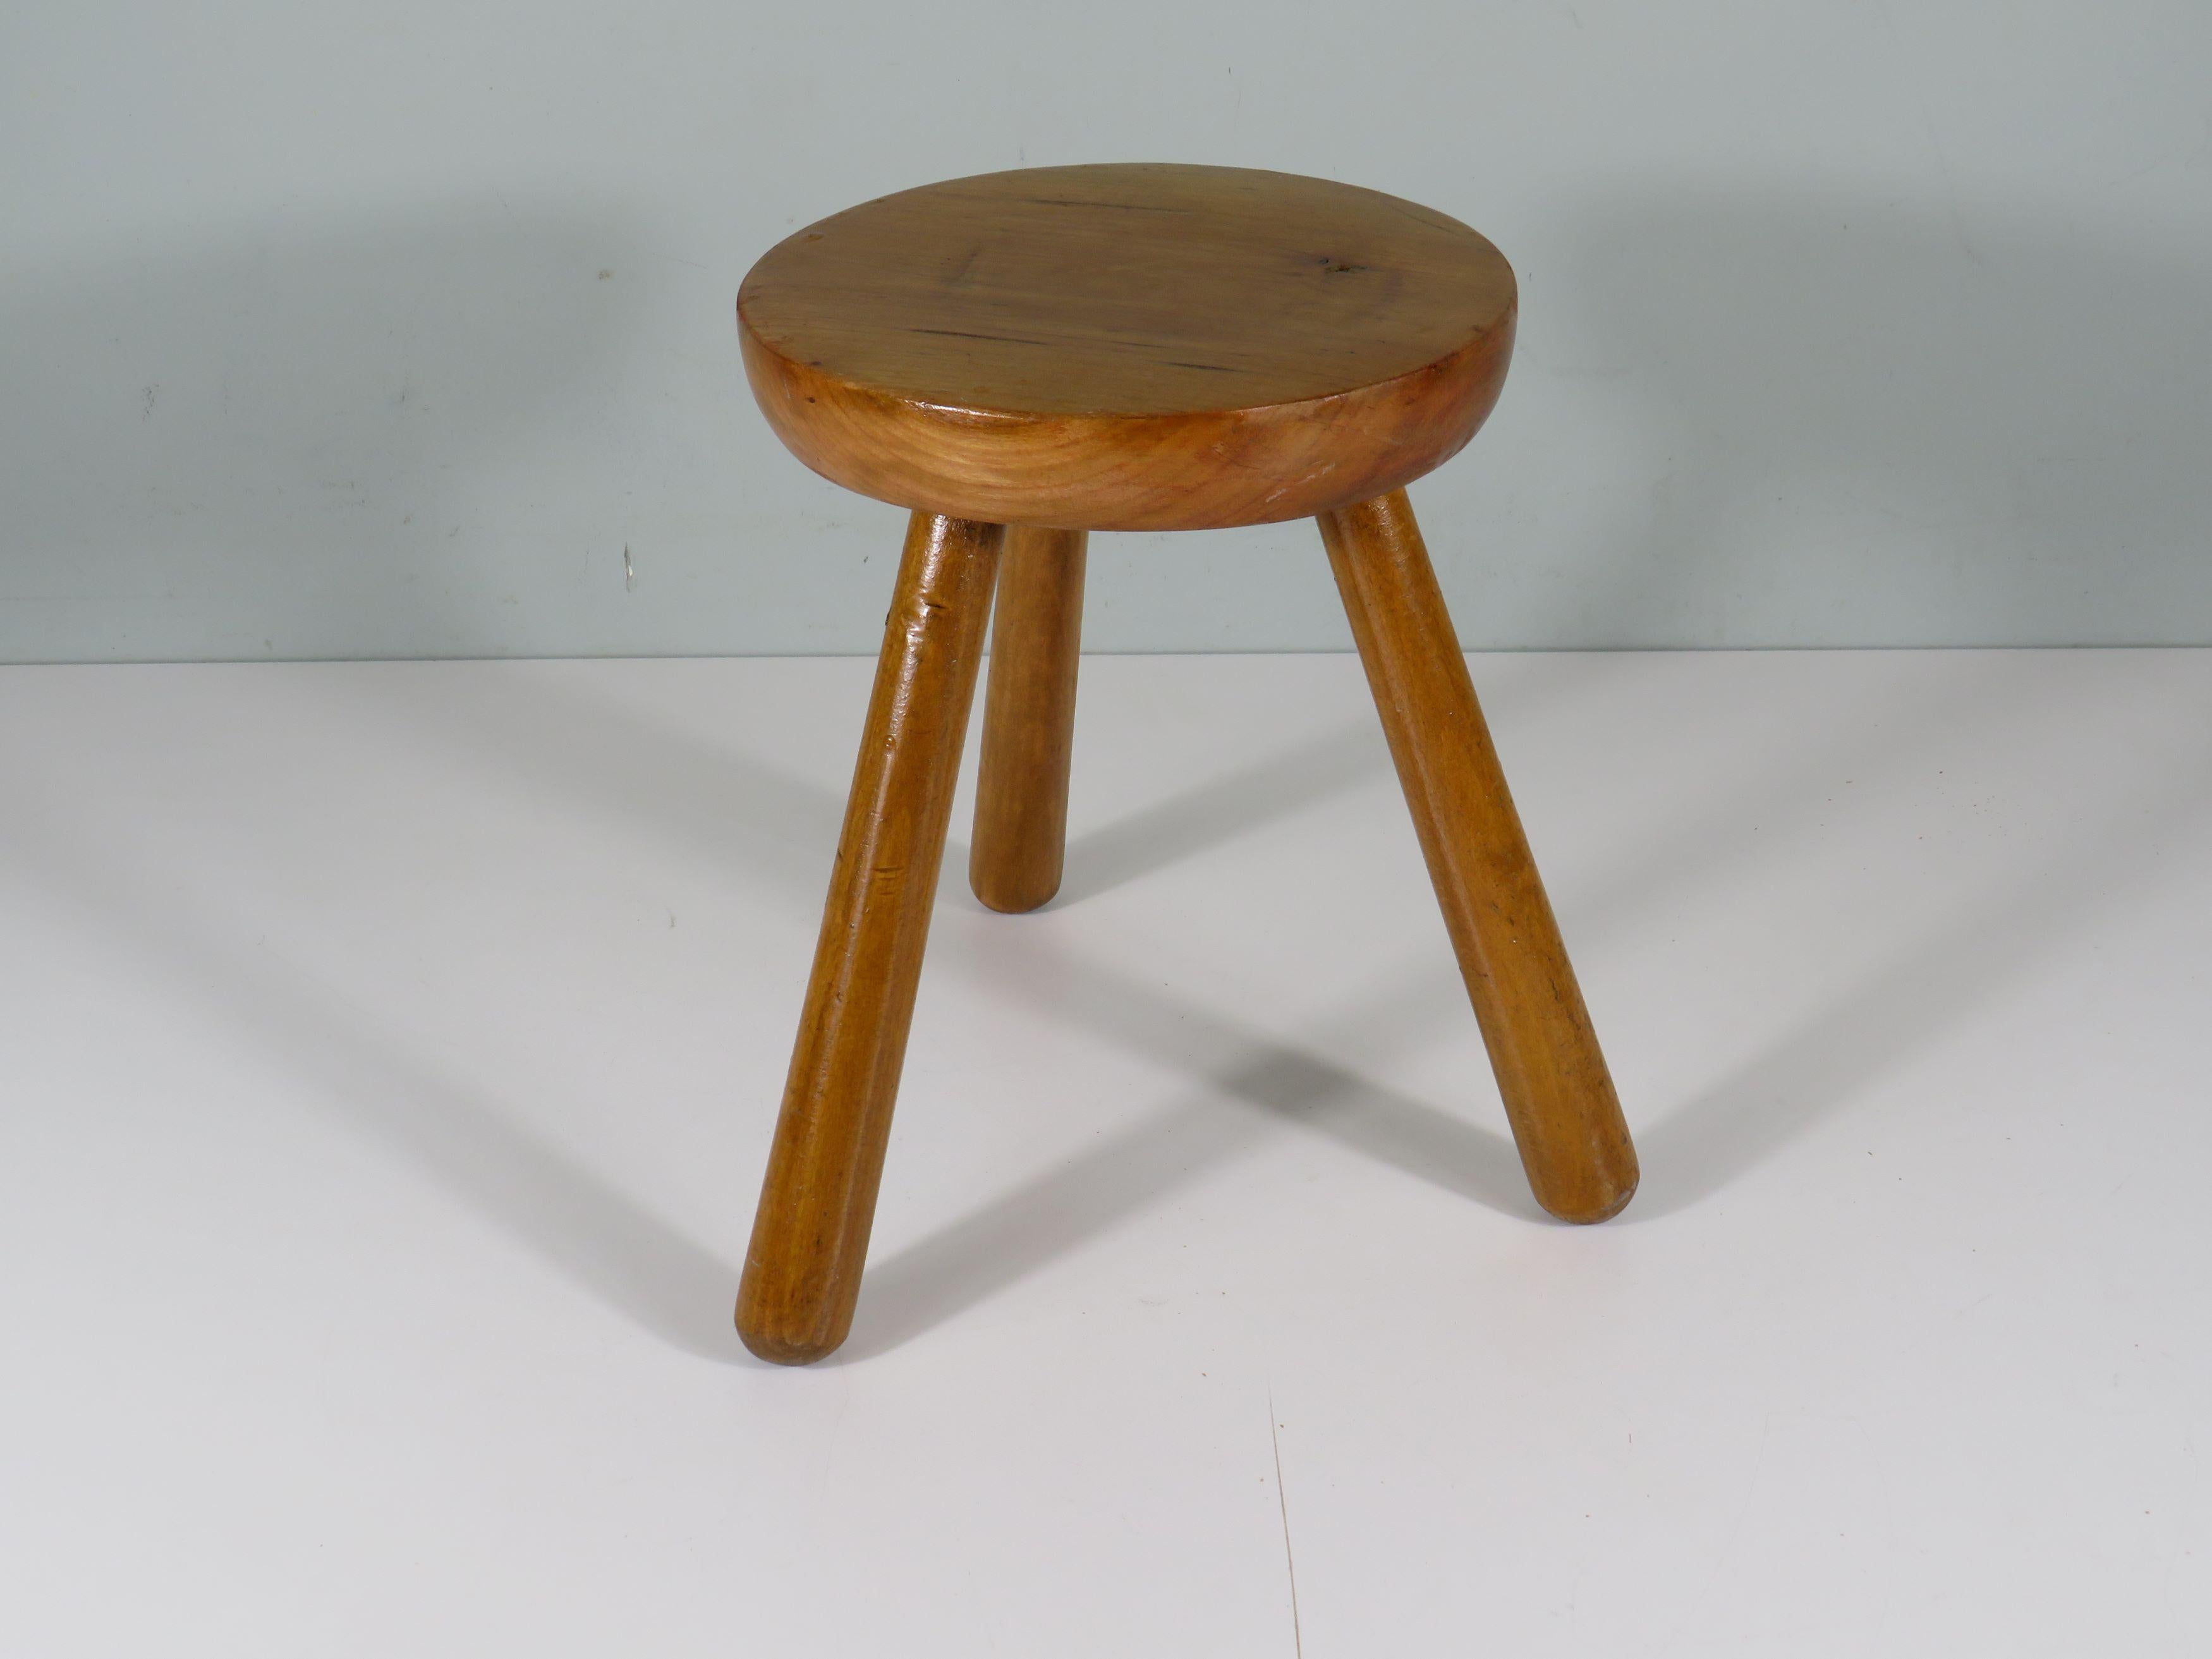 Tripod stool with round, tapered legs.
The stool has a thick, solid wooden diagonally rounded seat.
It is in good, sturdy condition with signs of wear consistent with its age, but these make the stool just as charming.
Height: 28.5 cm. seat